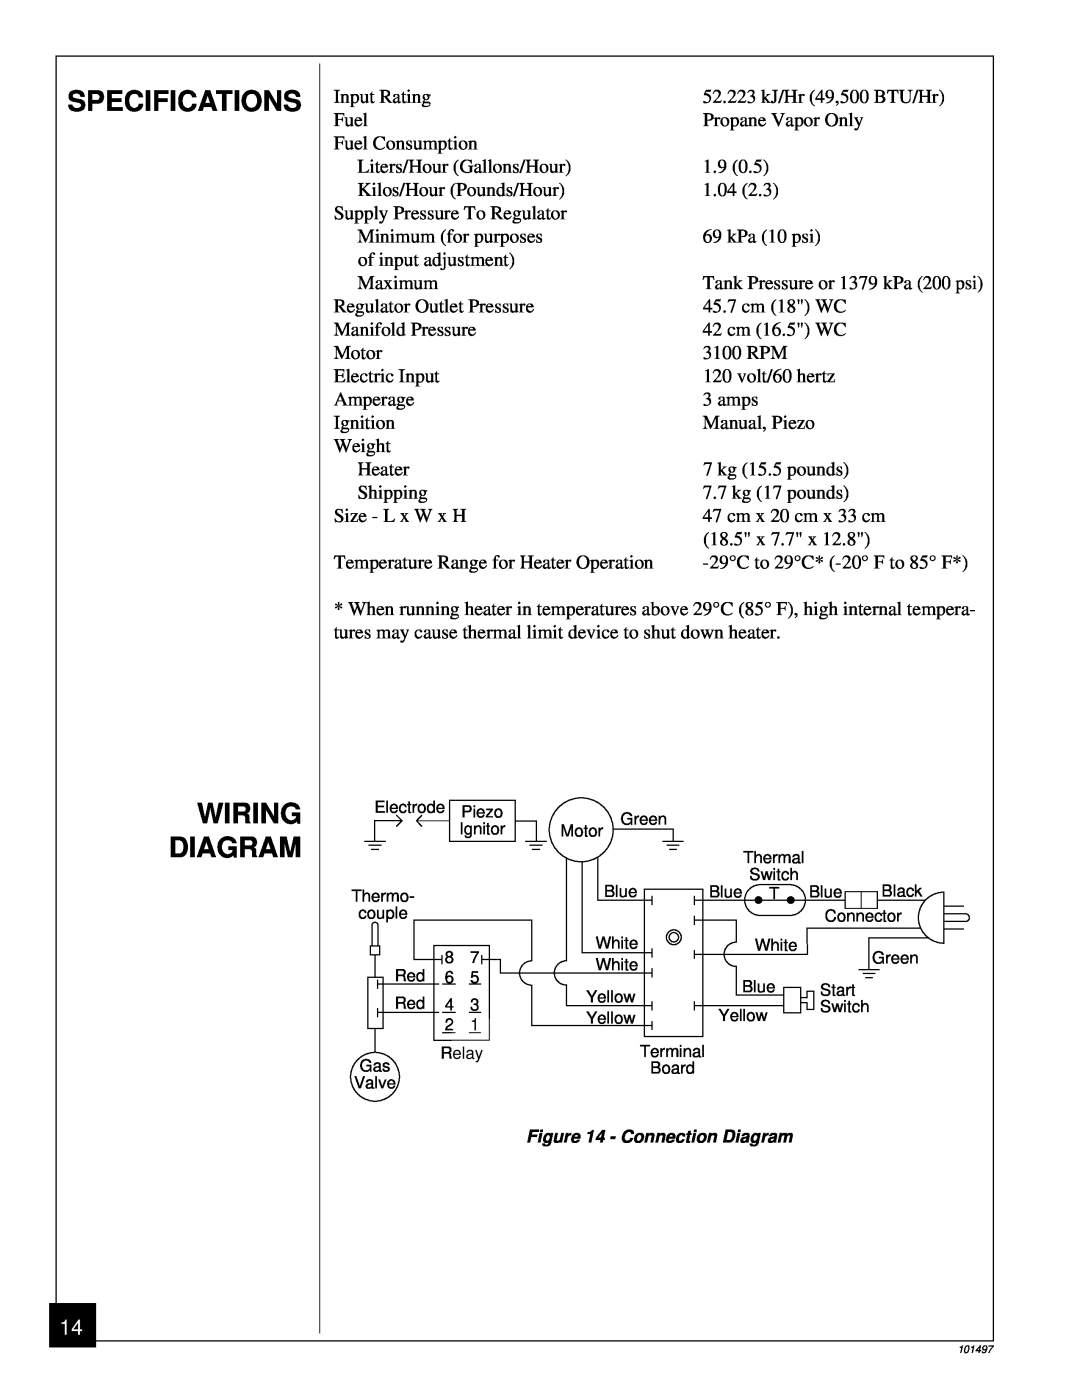 Homelite HHC50LP owner manual Specifications, Wiring Diagram 